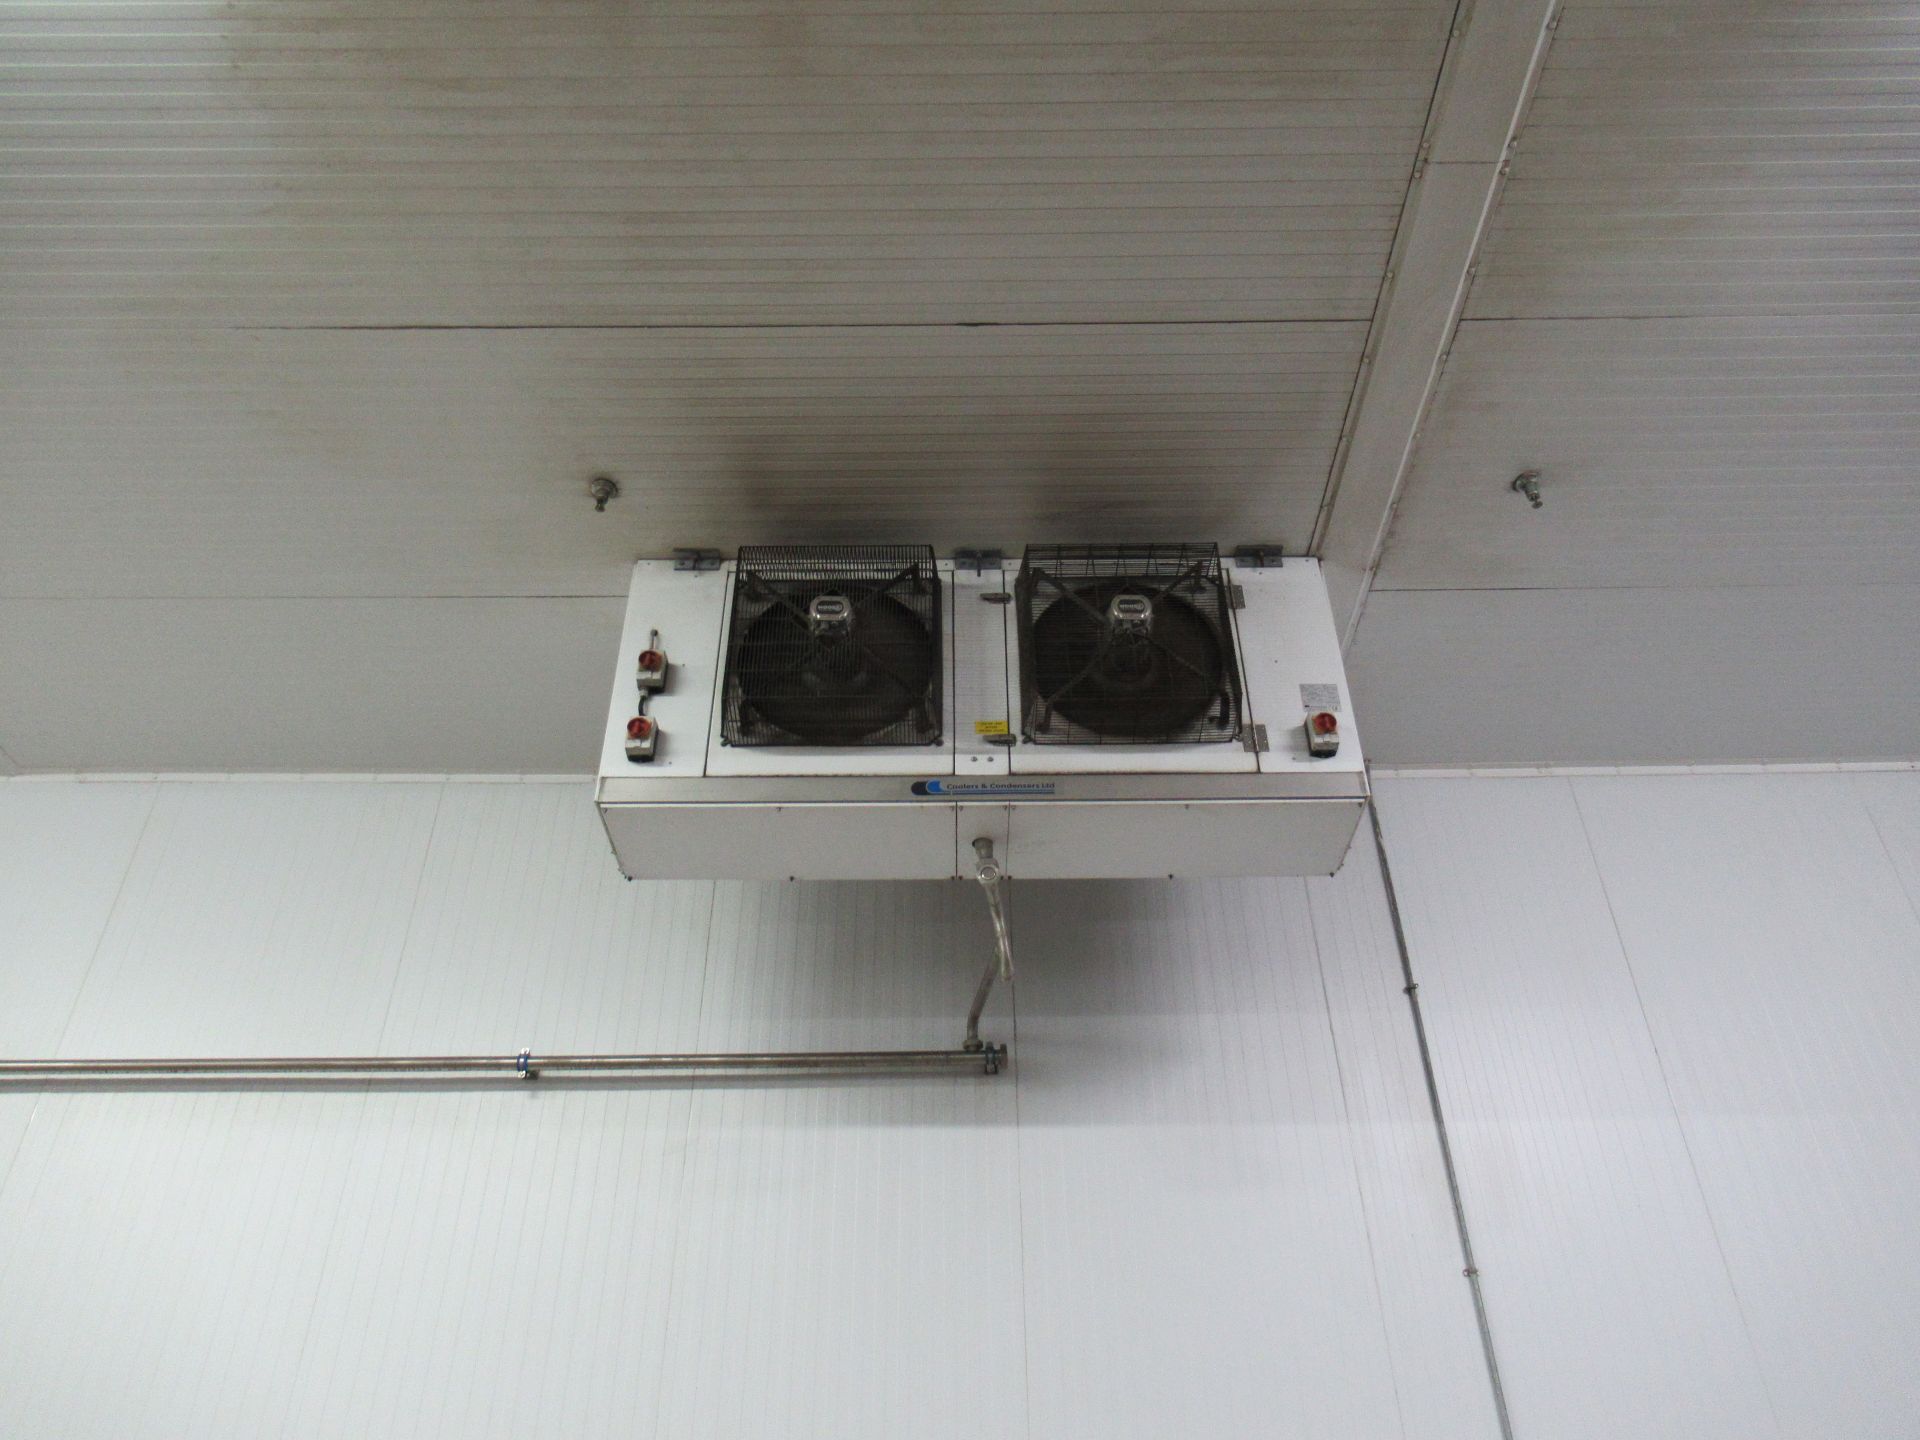 4 Coolers and Condensers cooling evaporators, 2 fan acceptance of the highest bid on this lot is - Image 2 of 6